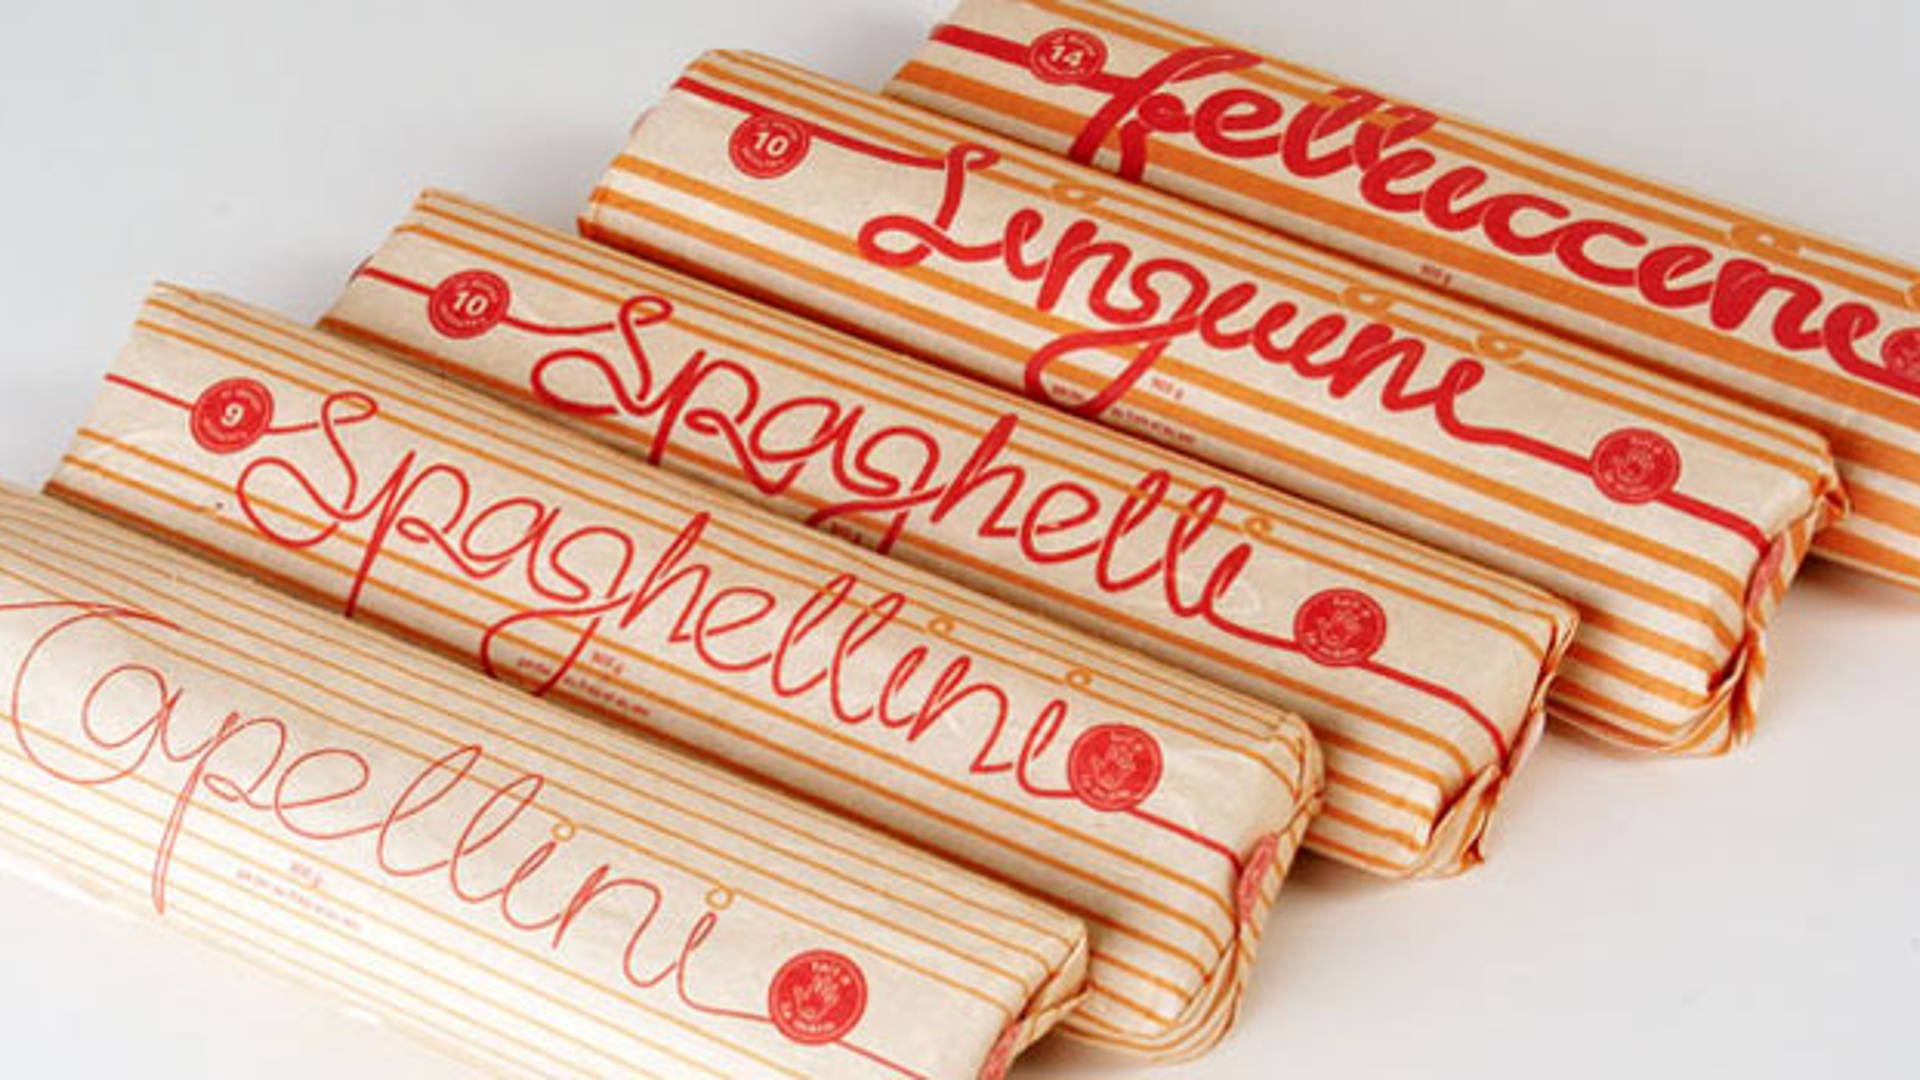 Featured image for Student Spotlight: Spaghetti et autres pâtes (Spaghetti and other Pasta) 